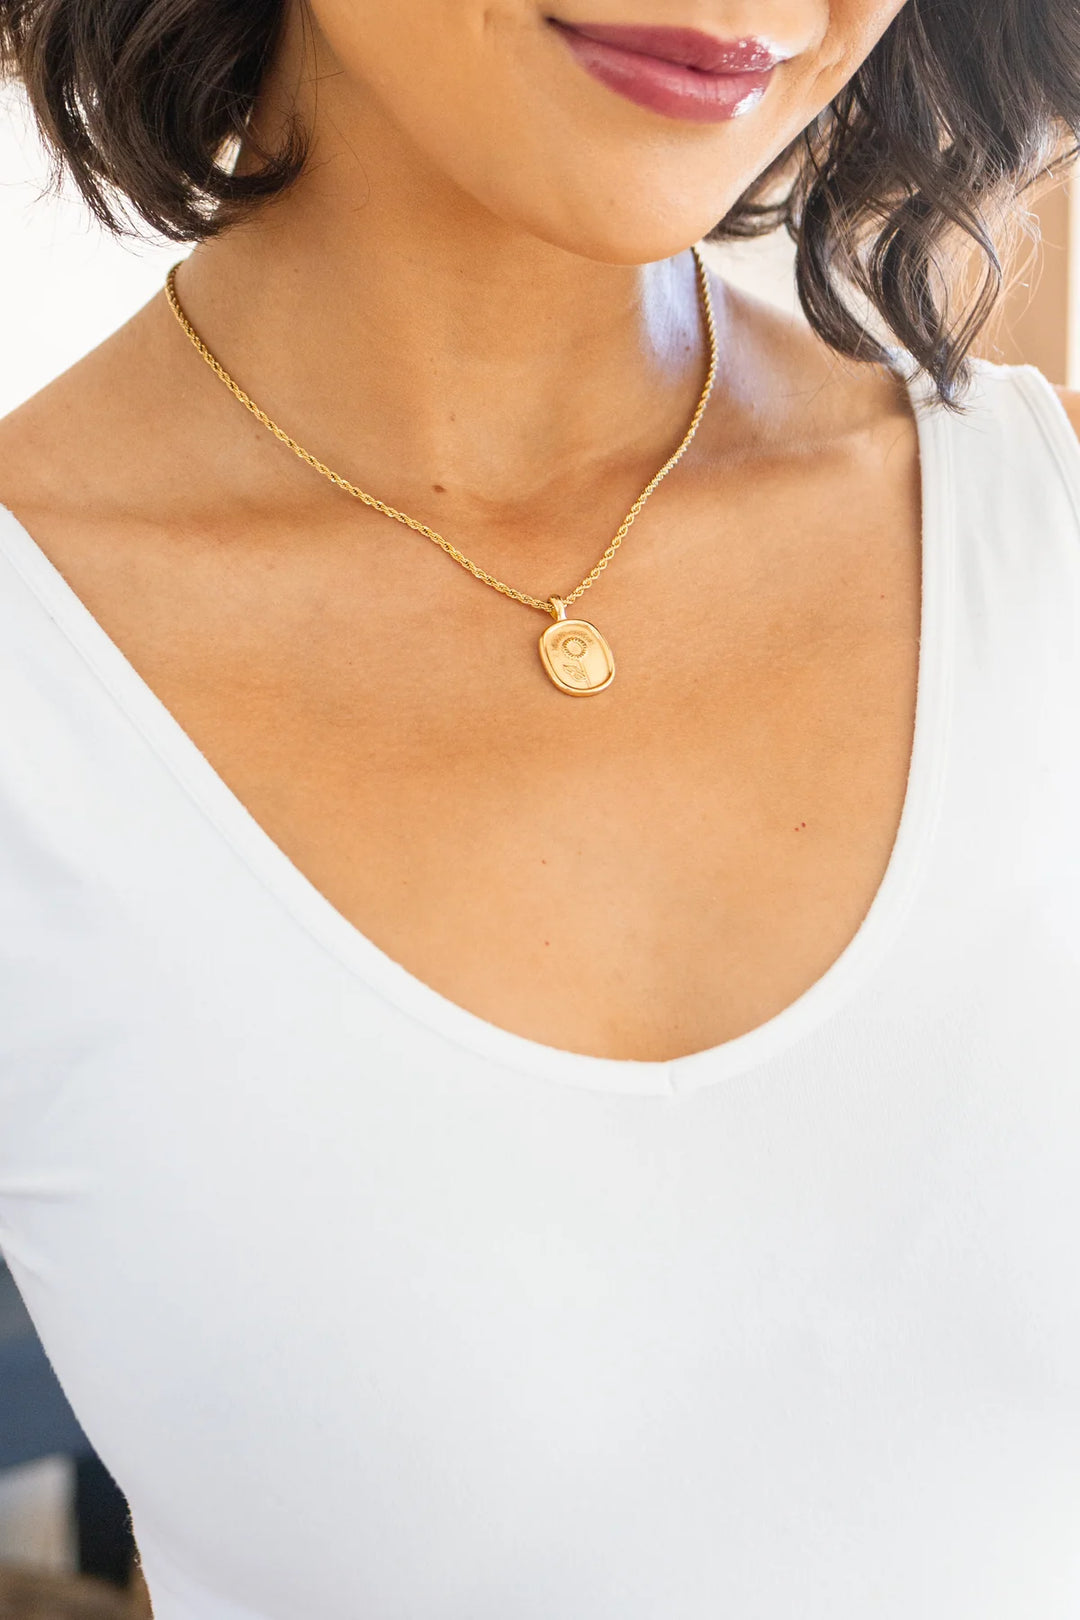 Simple Sunflower Pendent Necklace - Inspired Eye Boutique